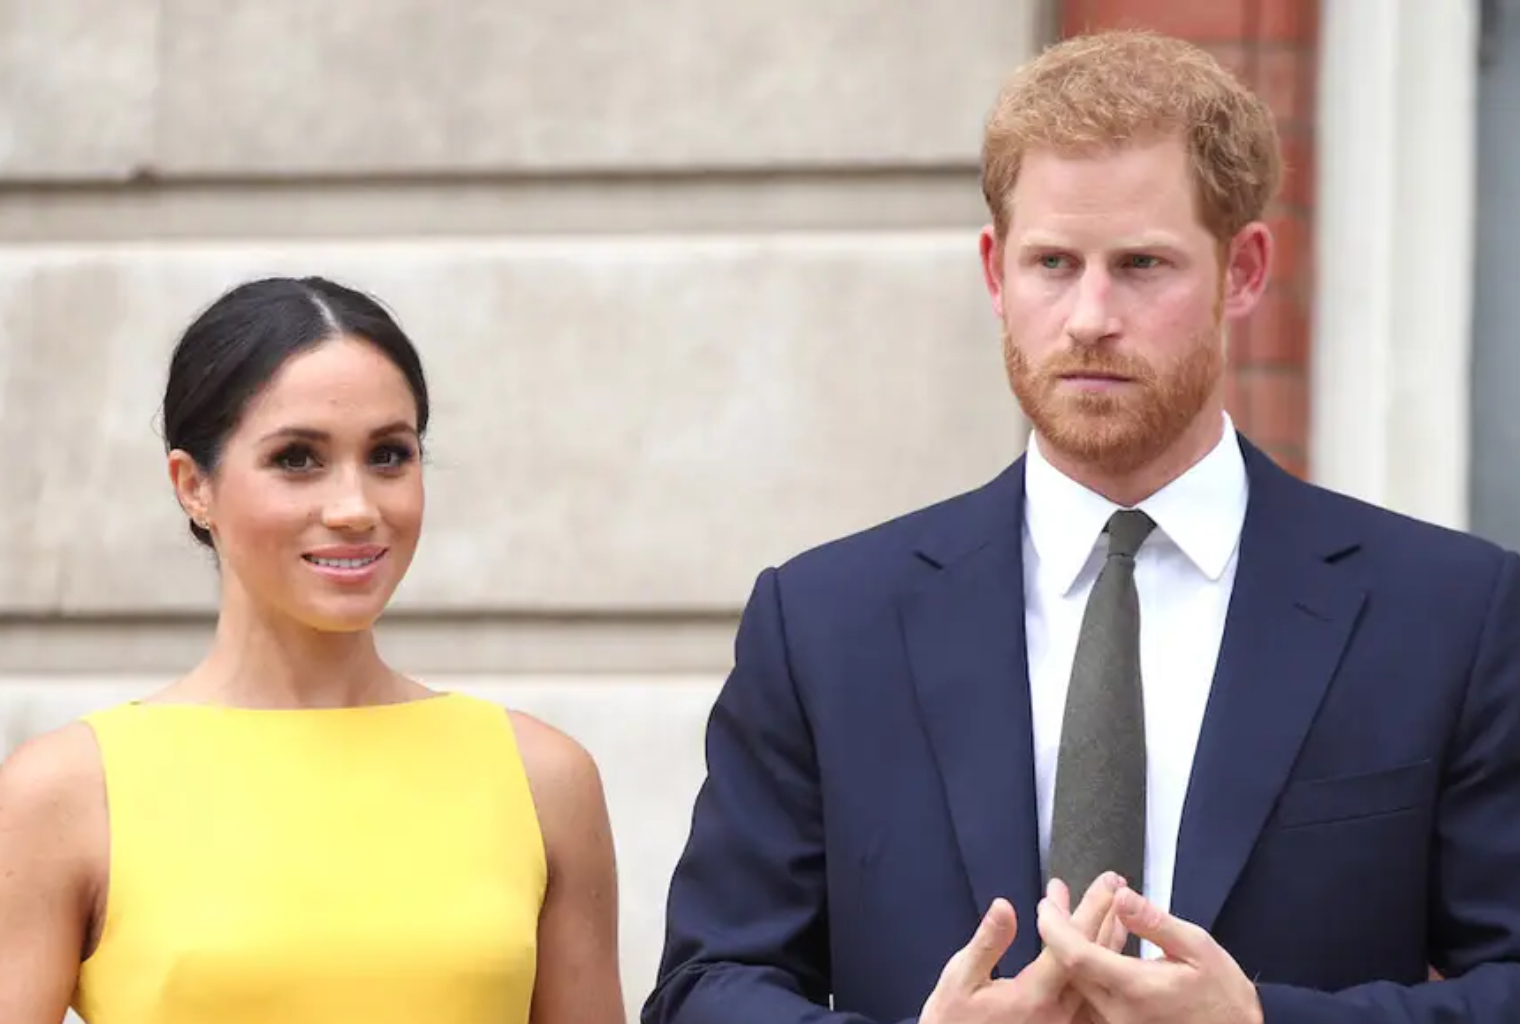 Bitcoin Evolution: Wanna Make $1 Million in 2 Months Like Prince Harry and Meghan Markle? It's a Scam